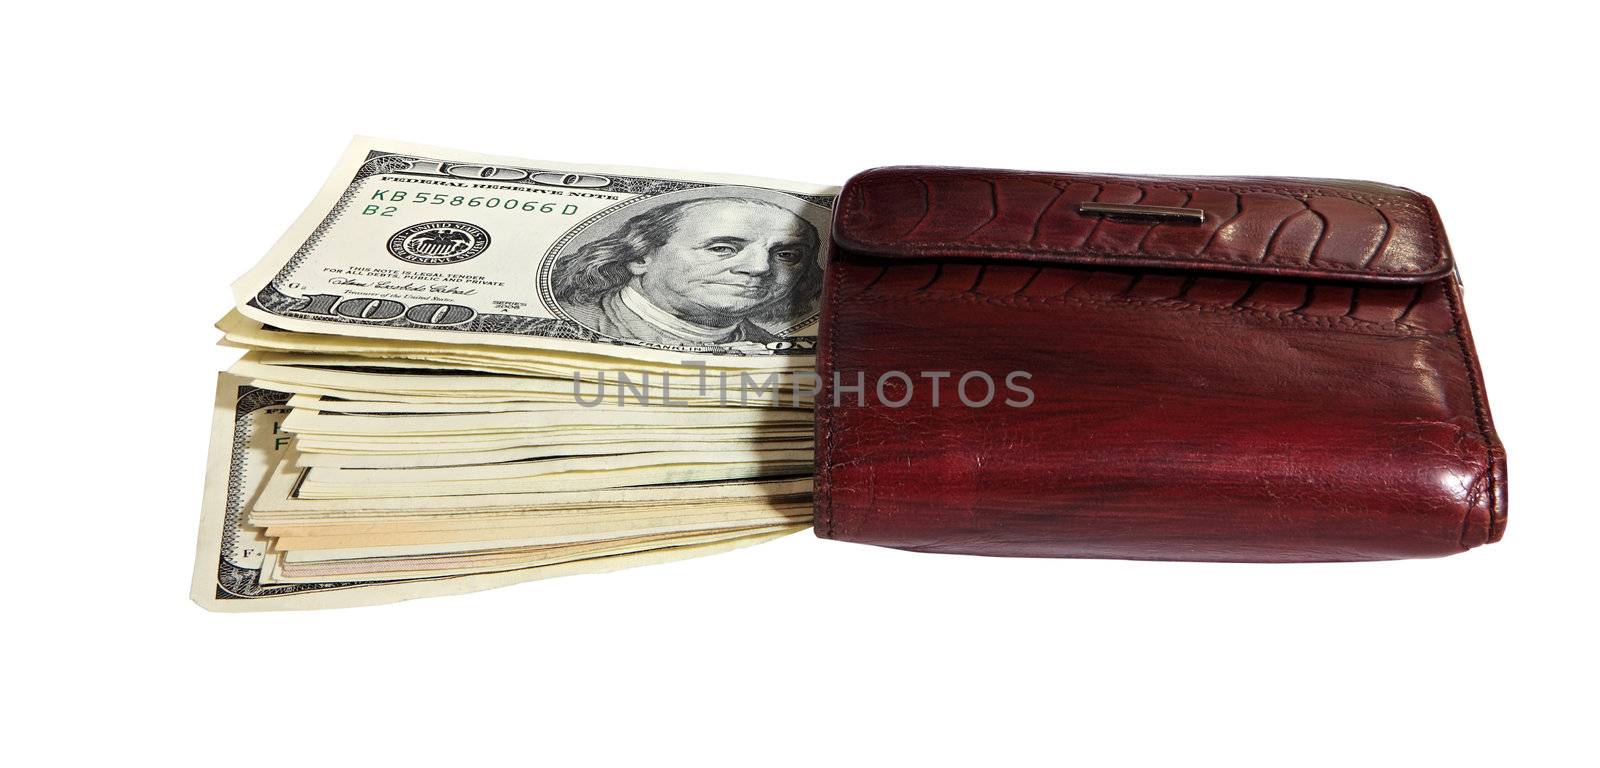 Full purse of money on the white background